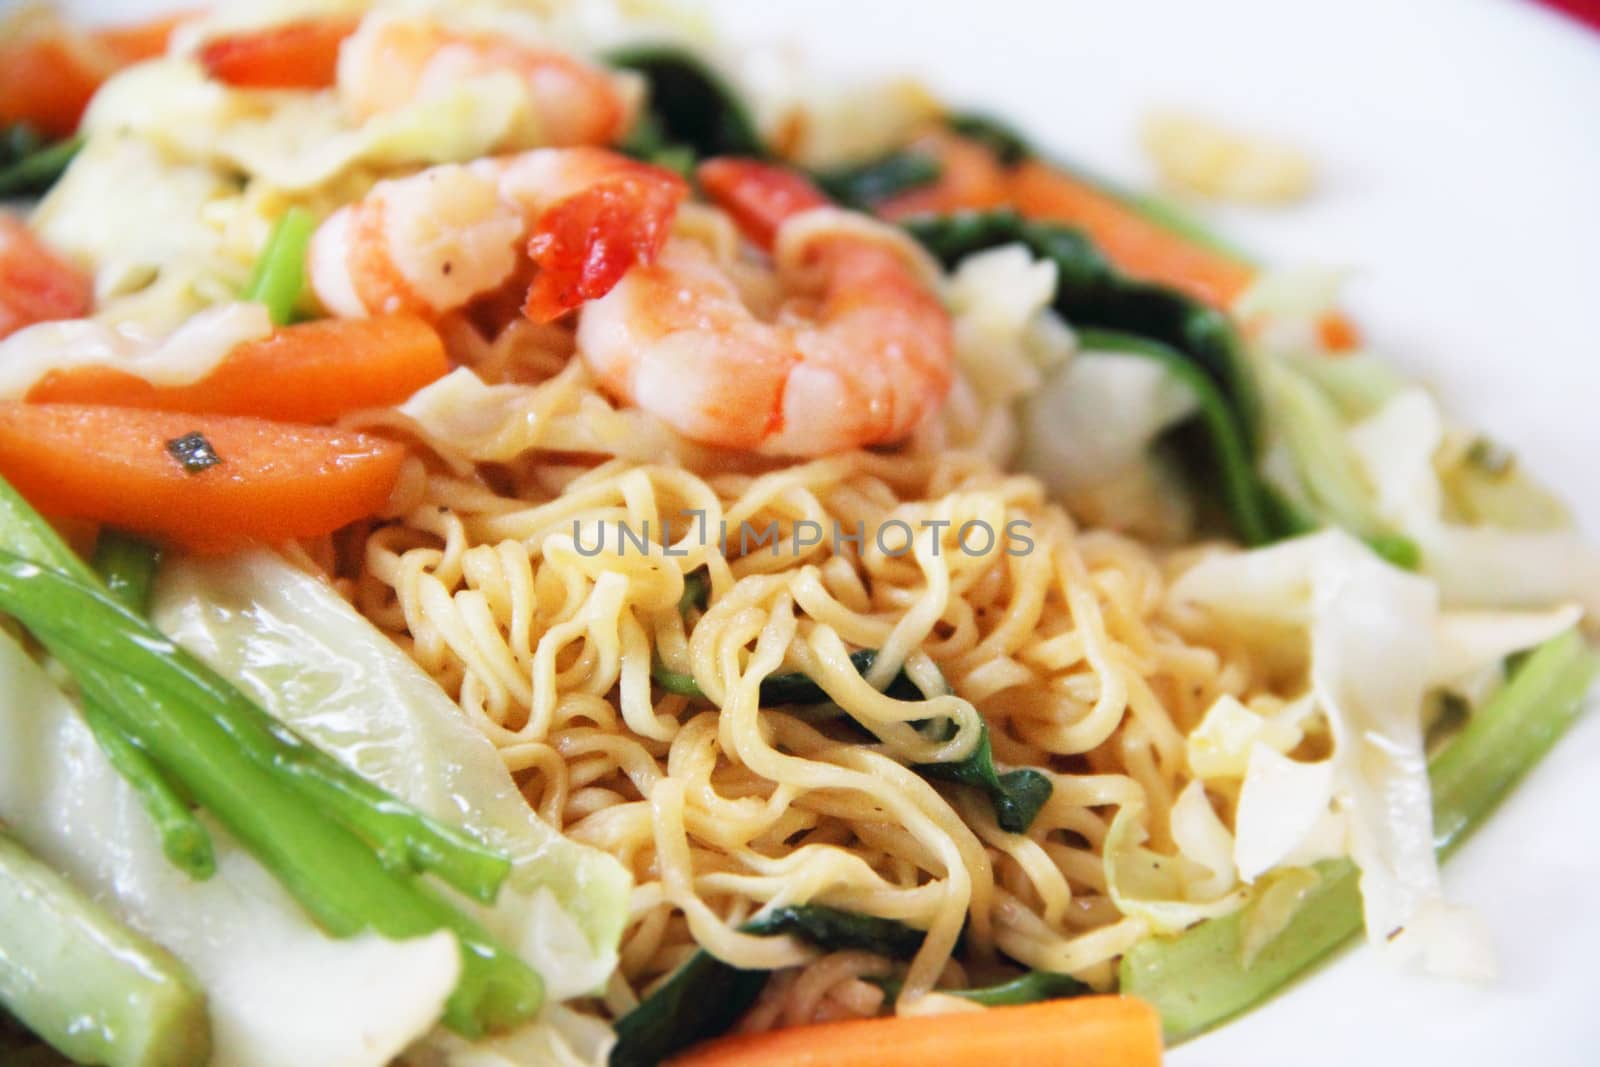 Trhaditional vietnam Noodles with shrimps and vegetables on plate